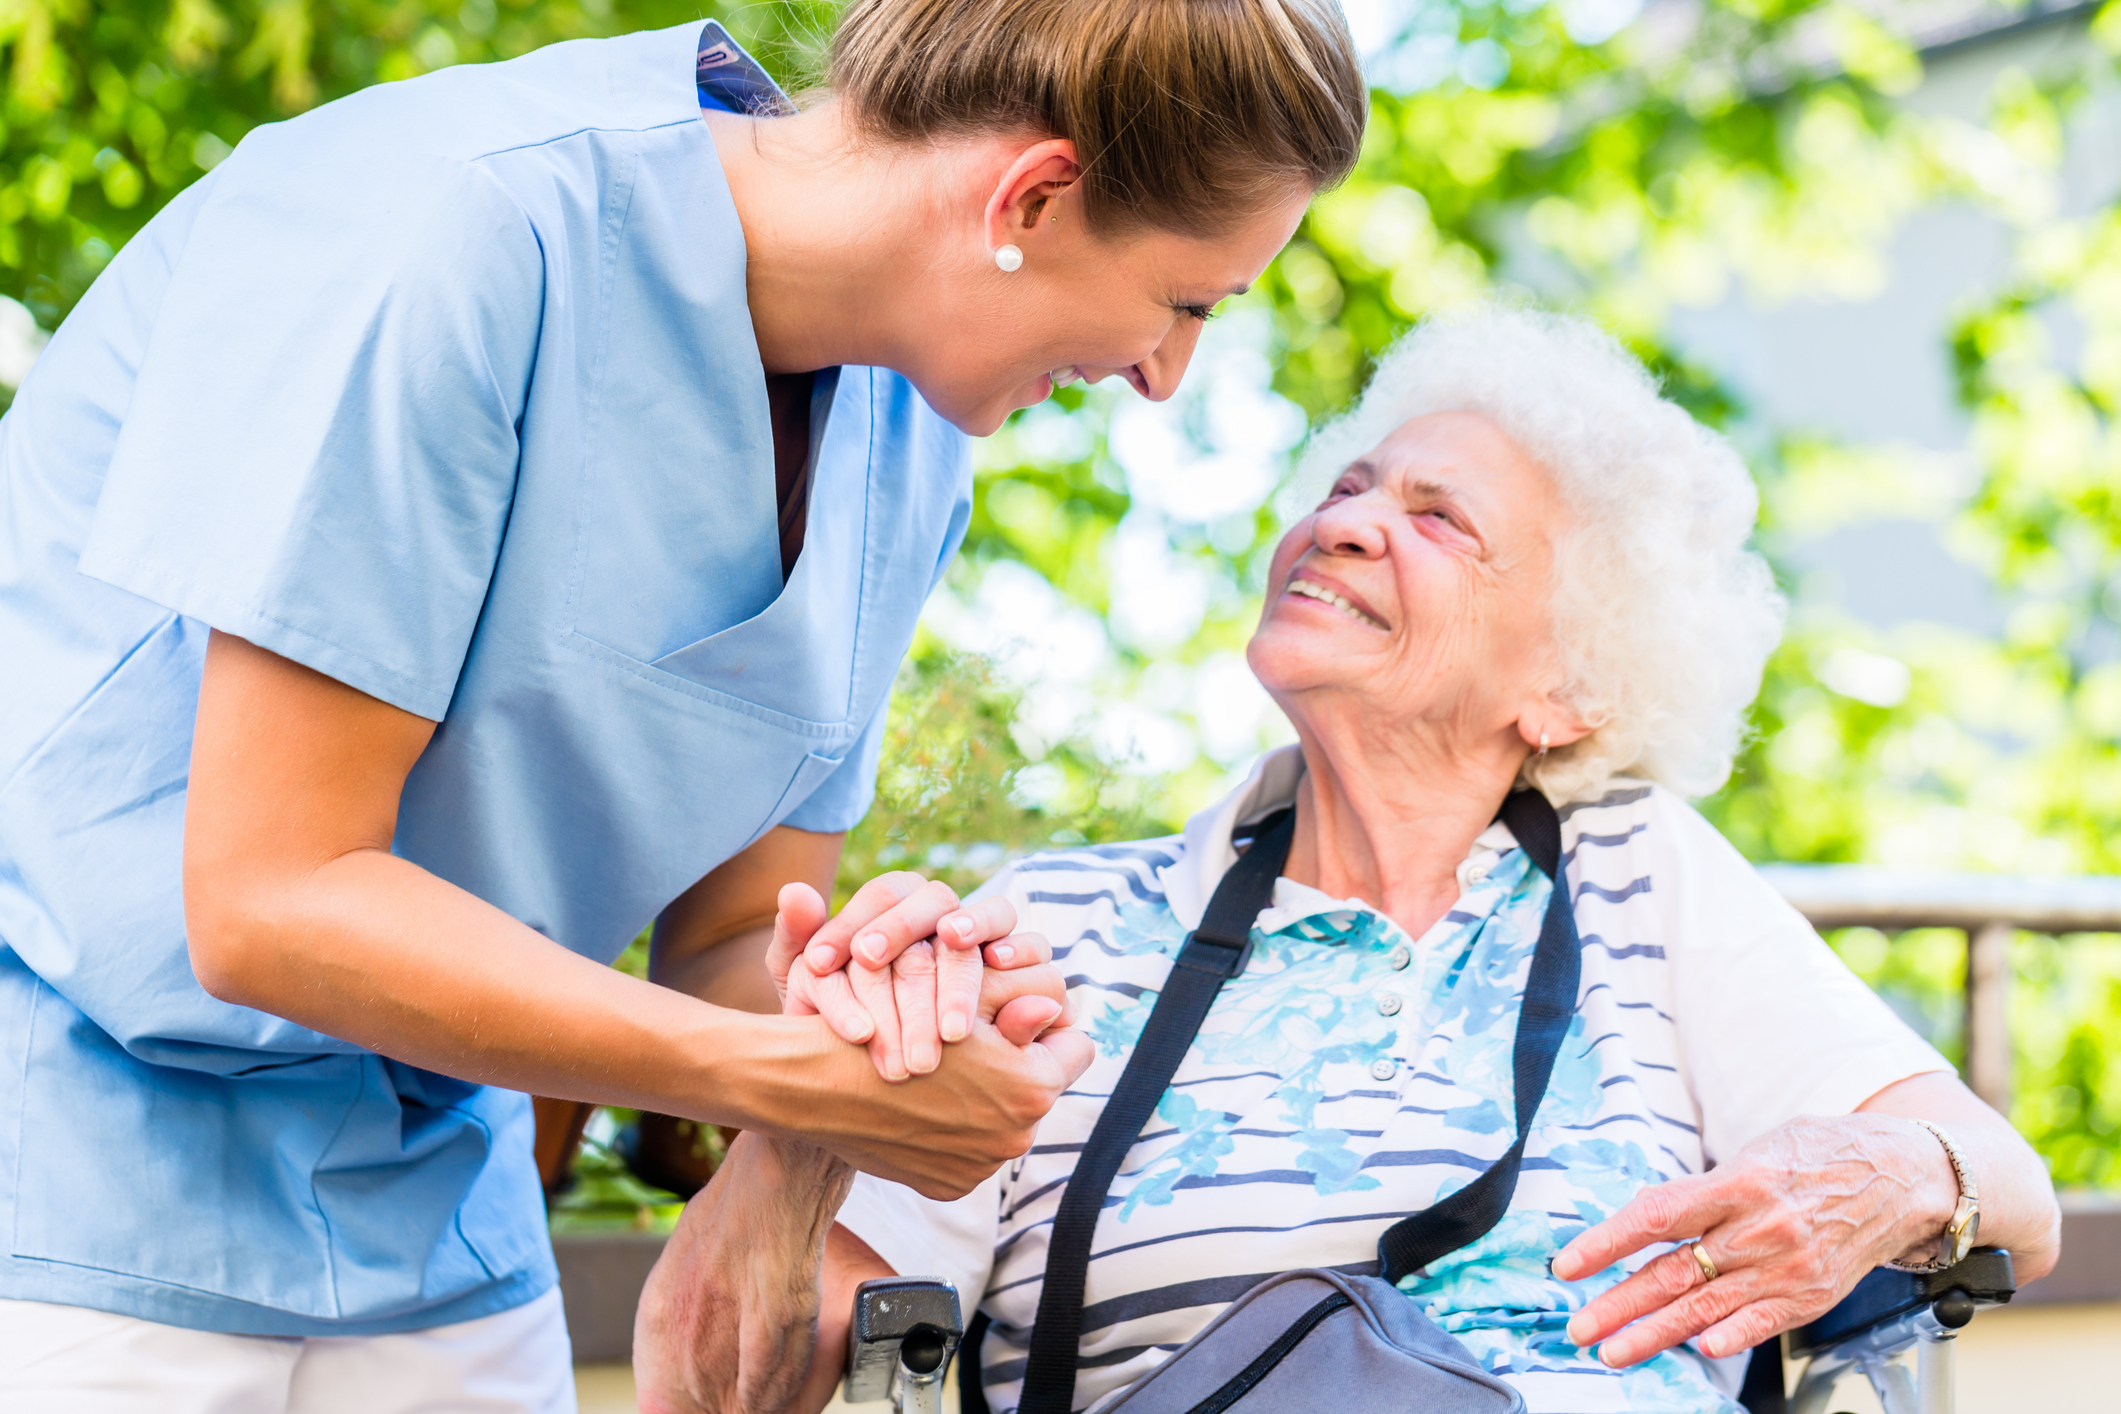 Practical And Highly Useful Assisted Living Guides That Can Improve This Industry